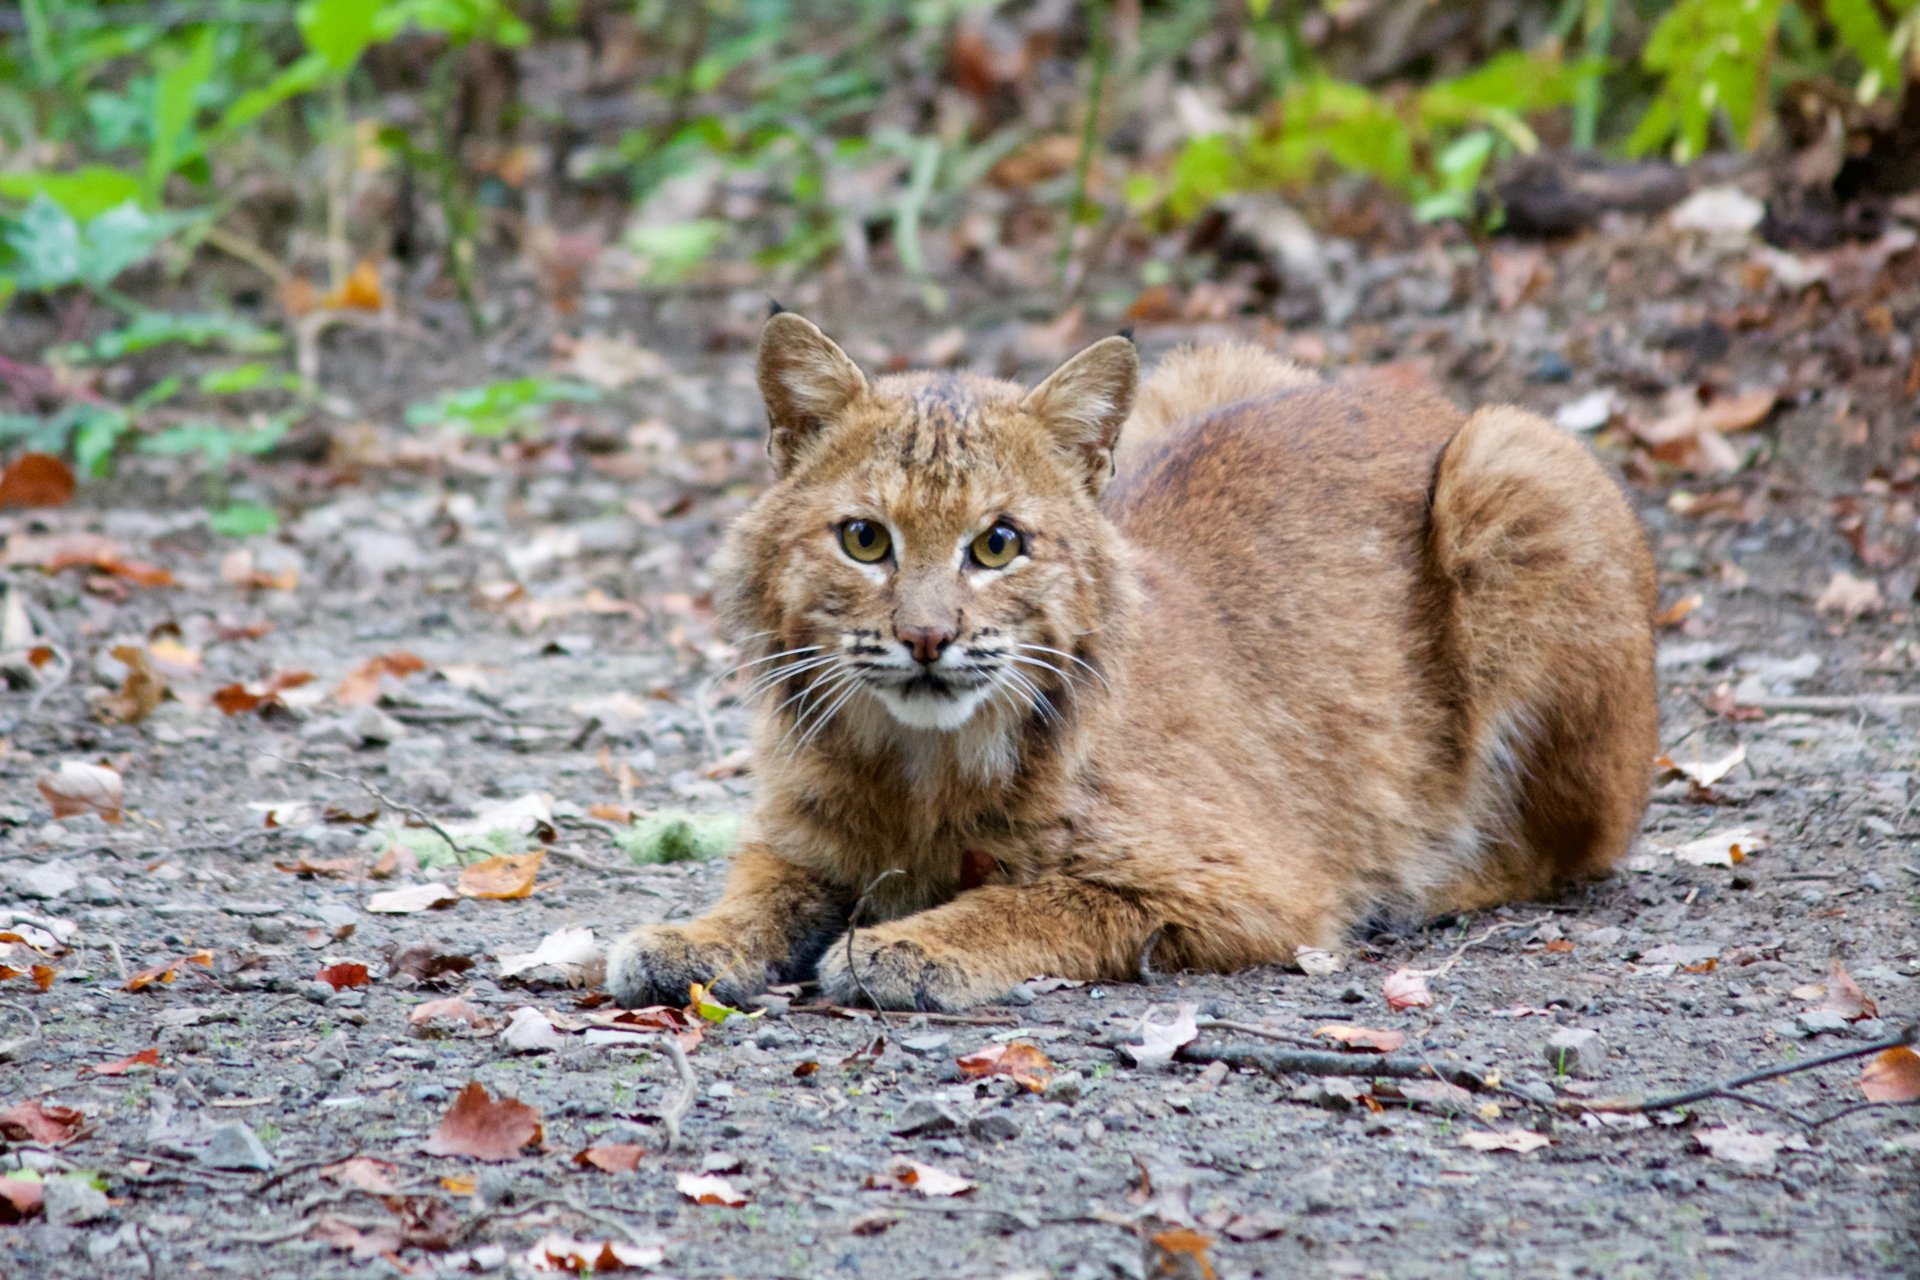 Brown bobcat sitting on a dirt clearing.